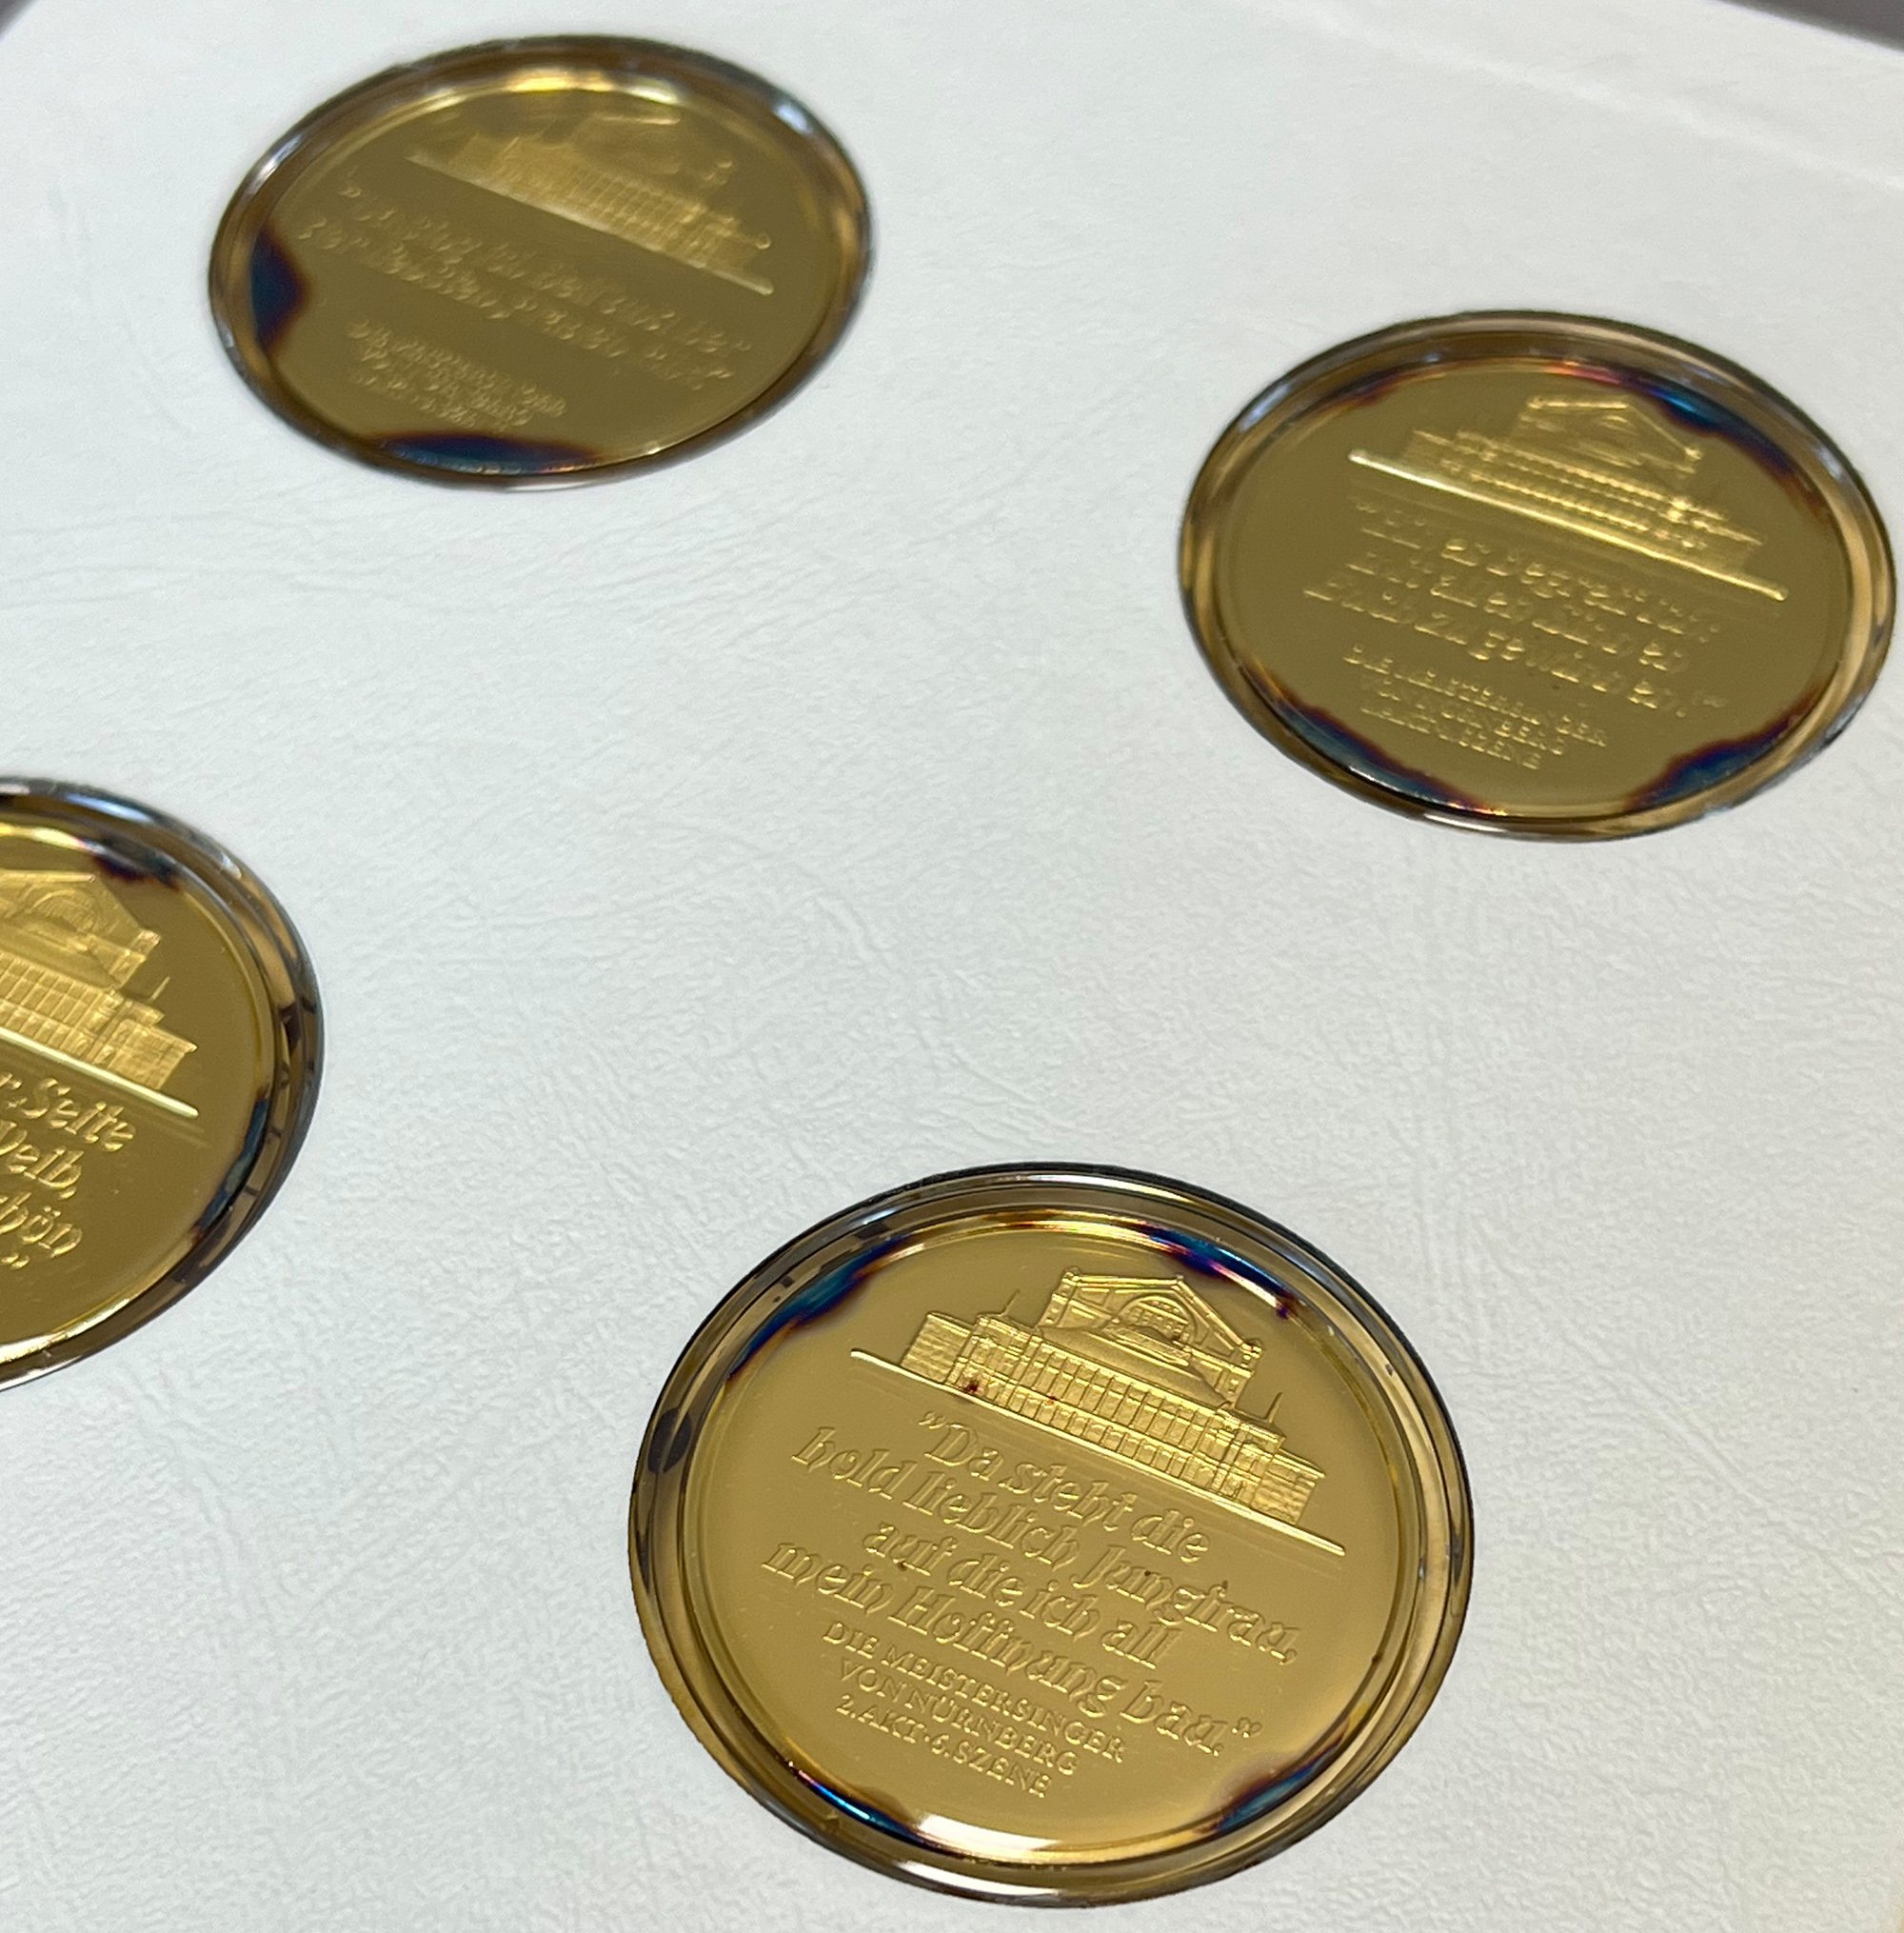 Collection of medals for the 100th anniversary of the Bayreuth Festival "Richard Wagner's Masterpie - Image 5 of 6